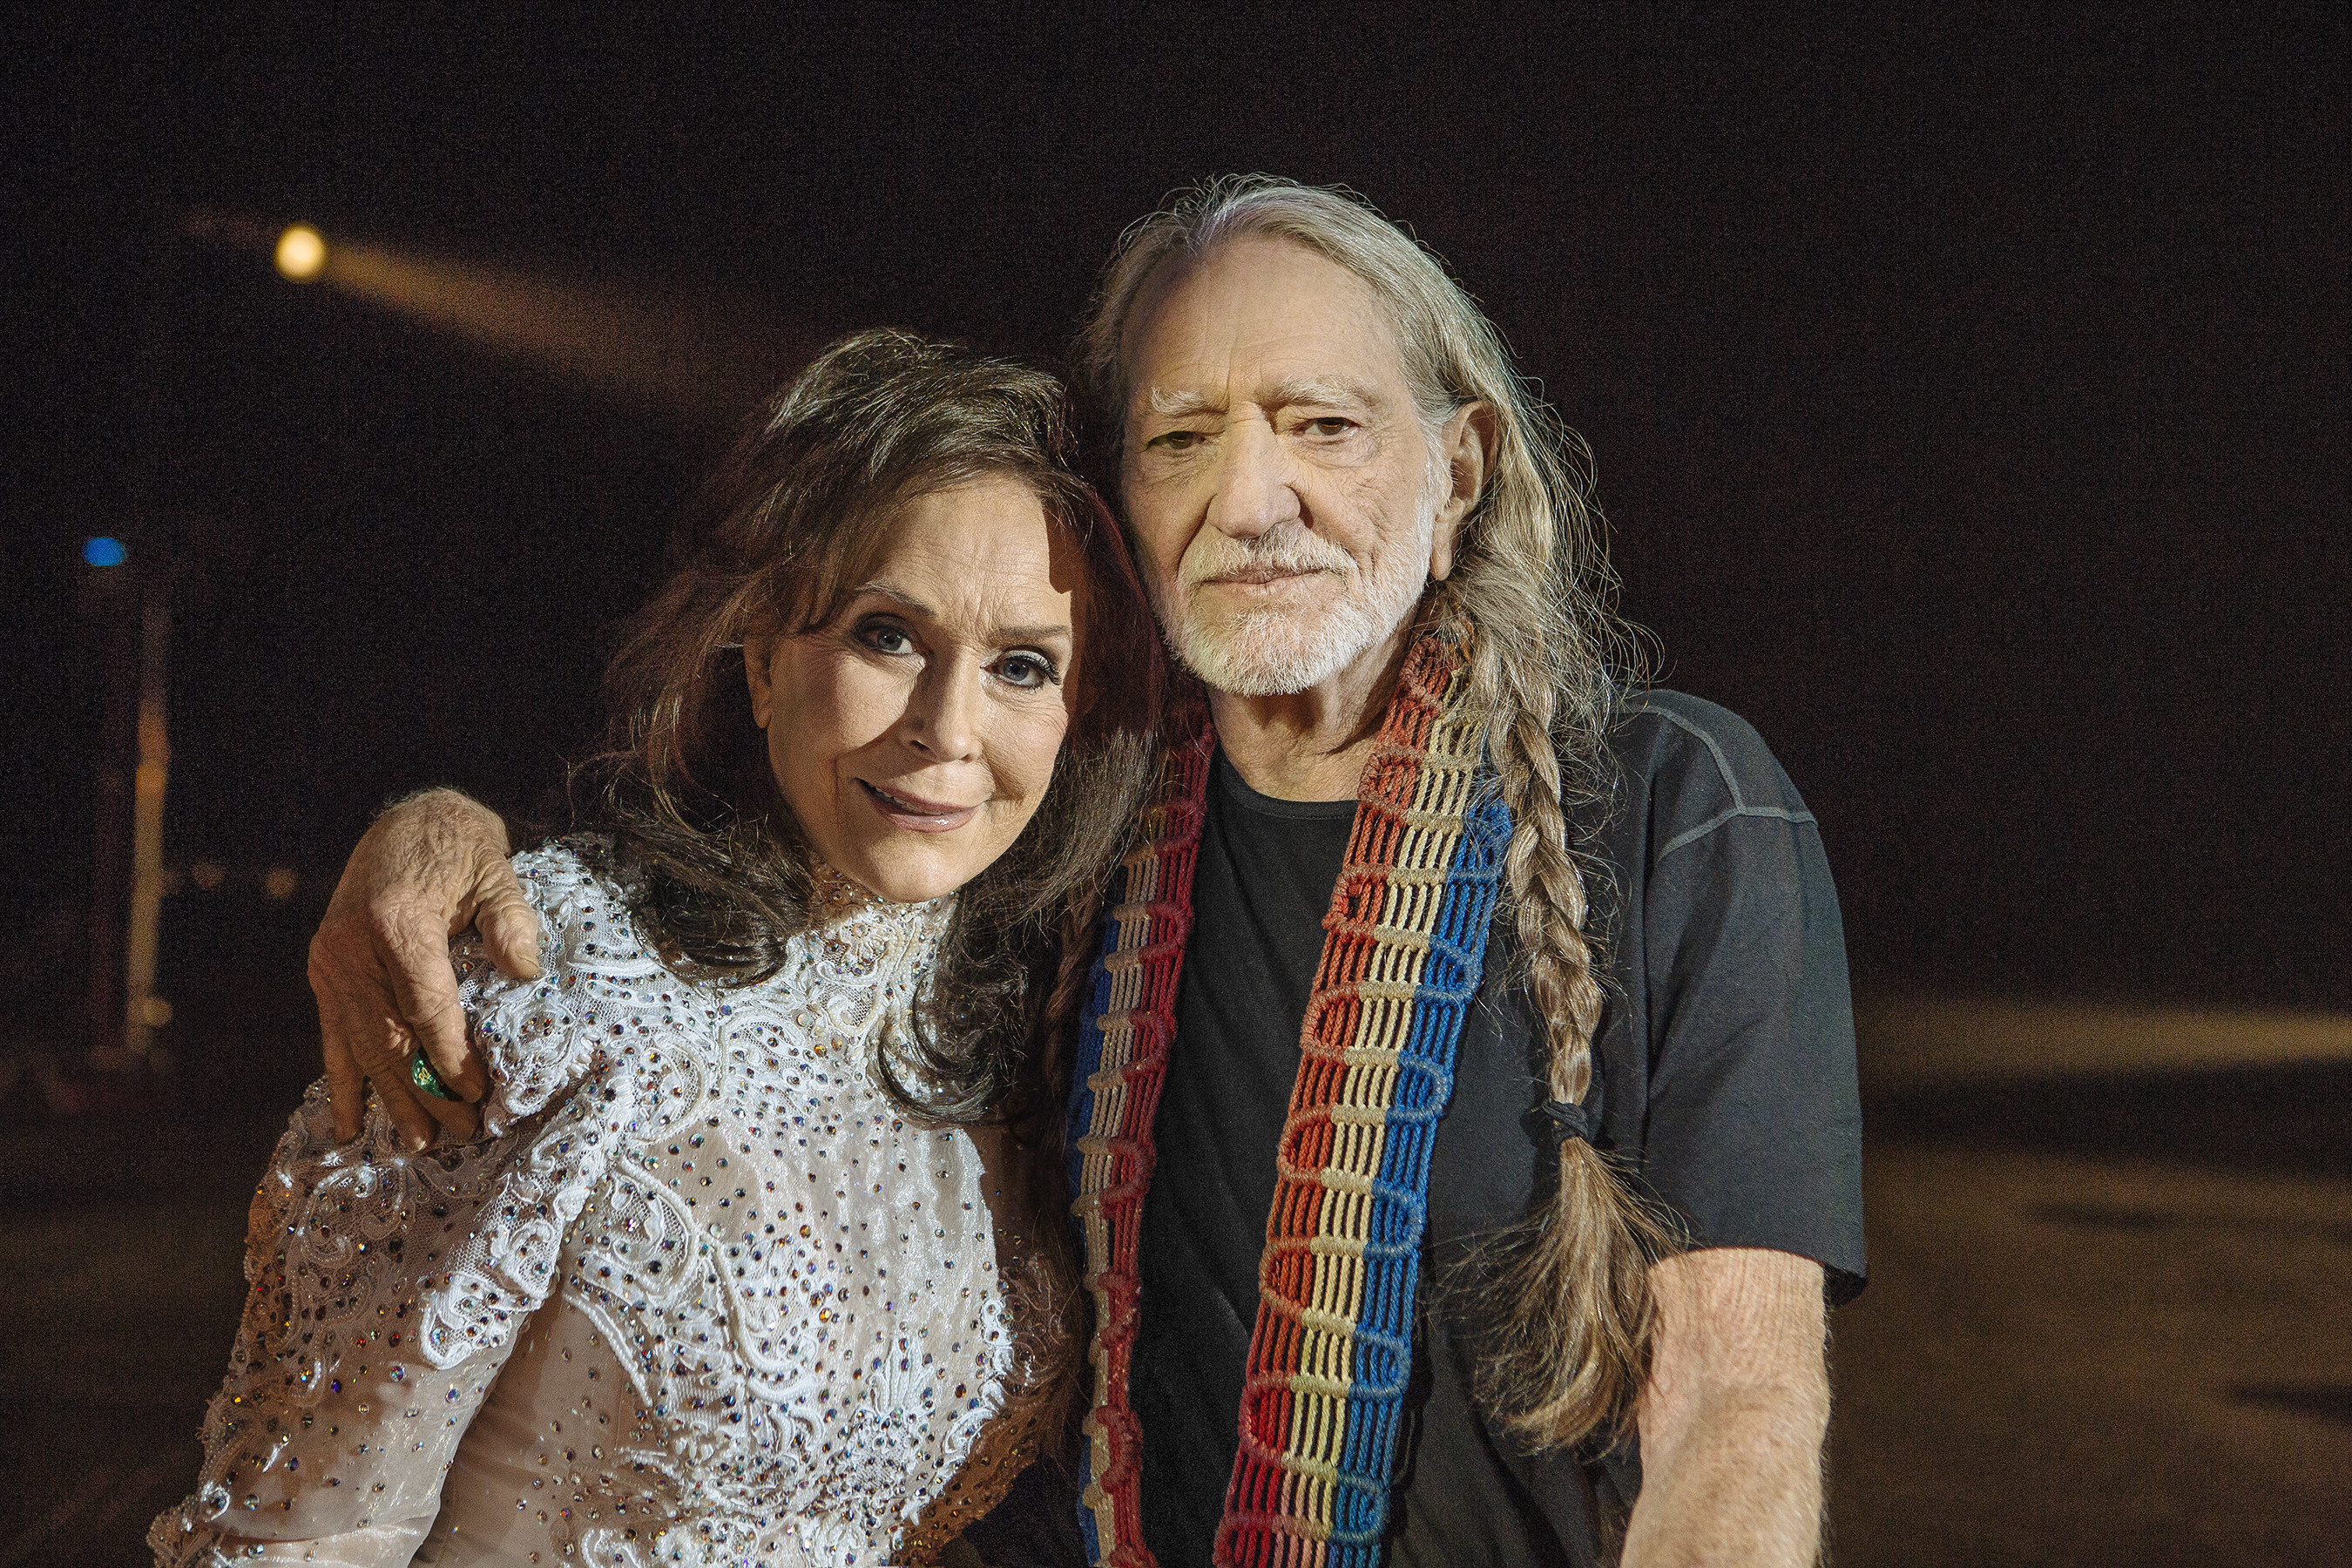 The new music video for "Lay Me Down"--a duet from Loretta Lynn's new album, FULL CIRCLE, sung with Willie Nelson--reunites two of music's greatest living legends on stage for the first time in more than 30 years.